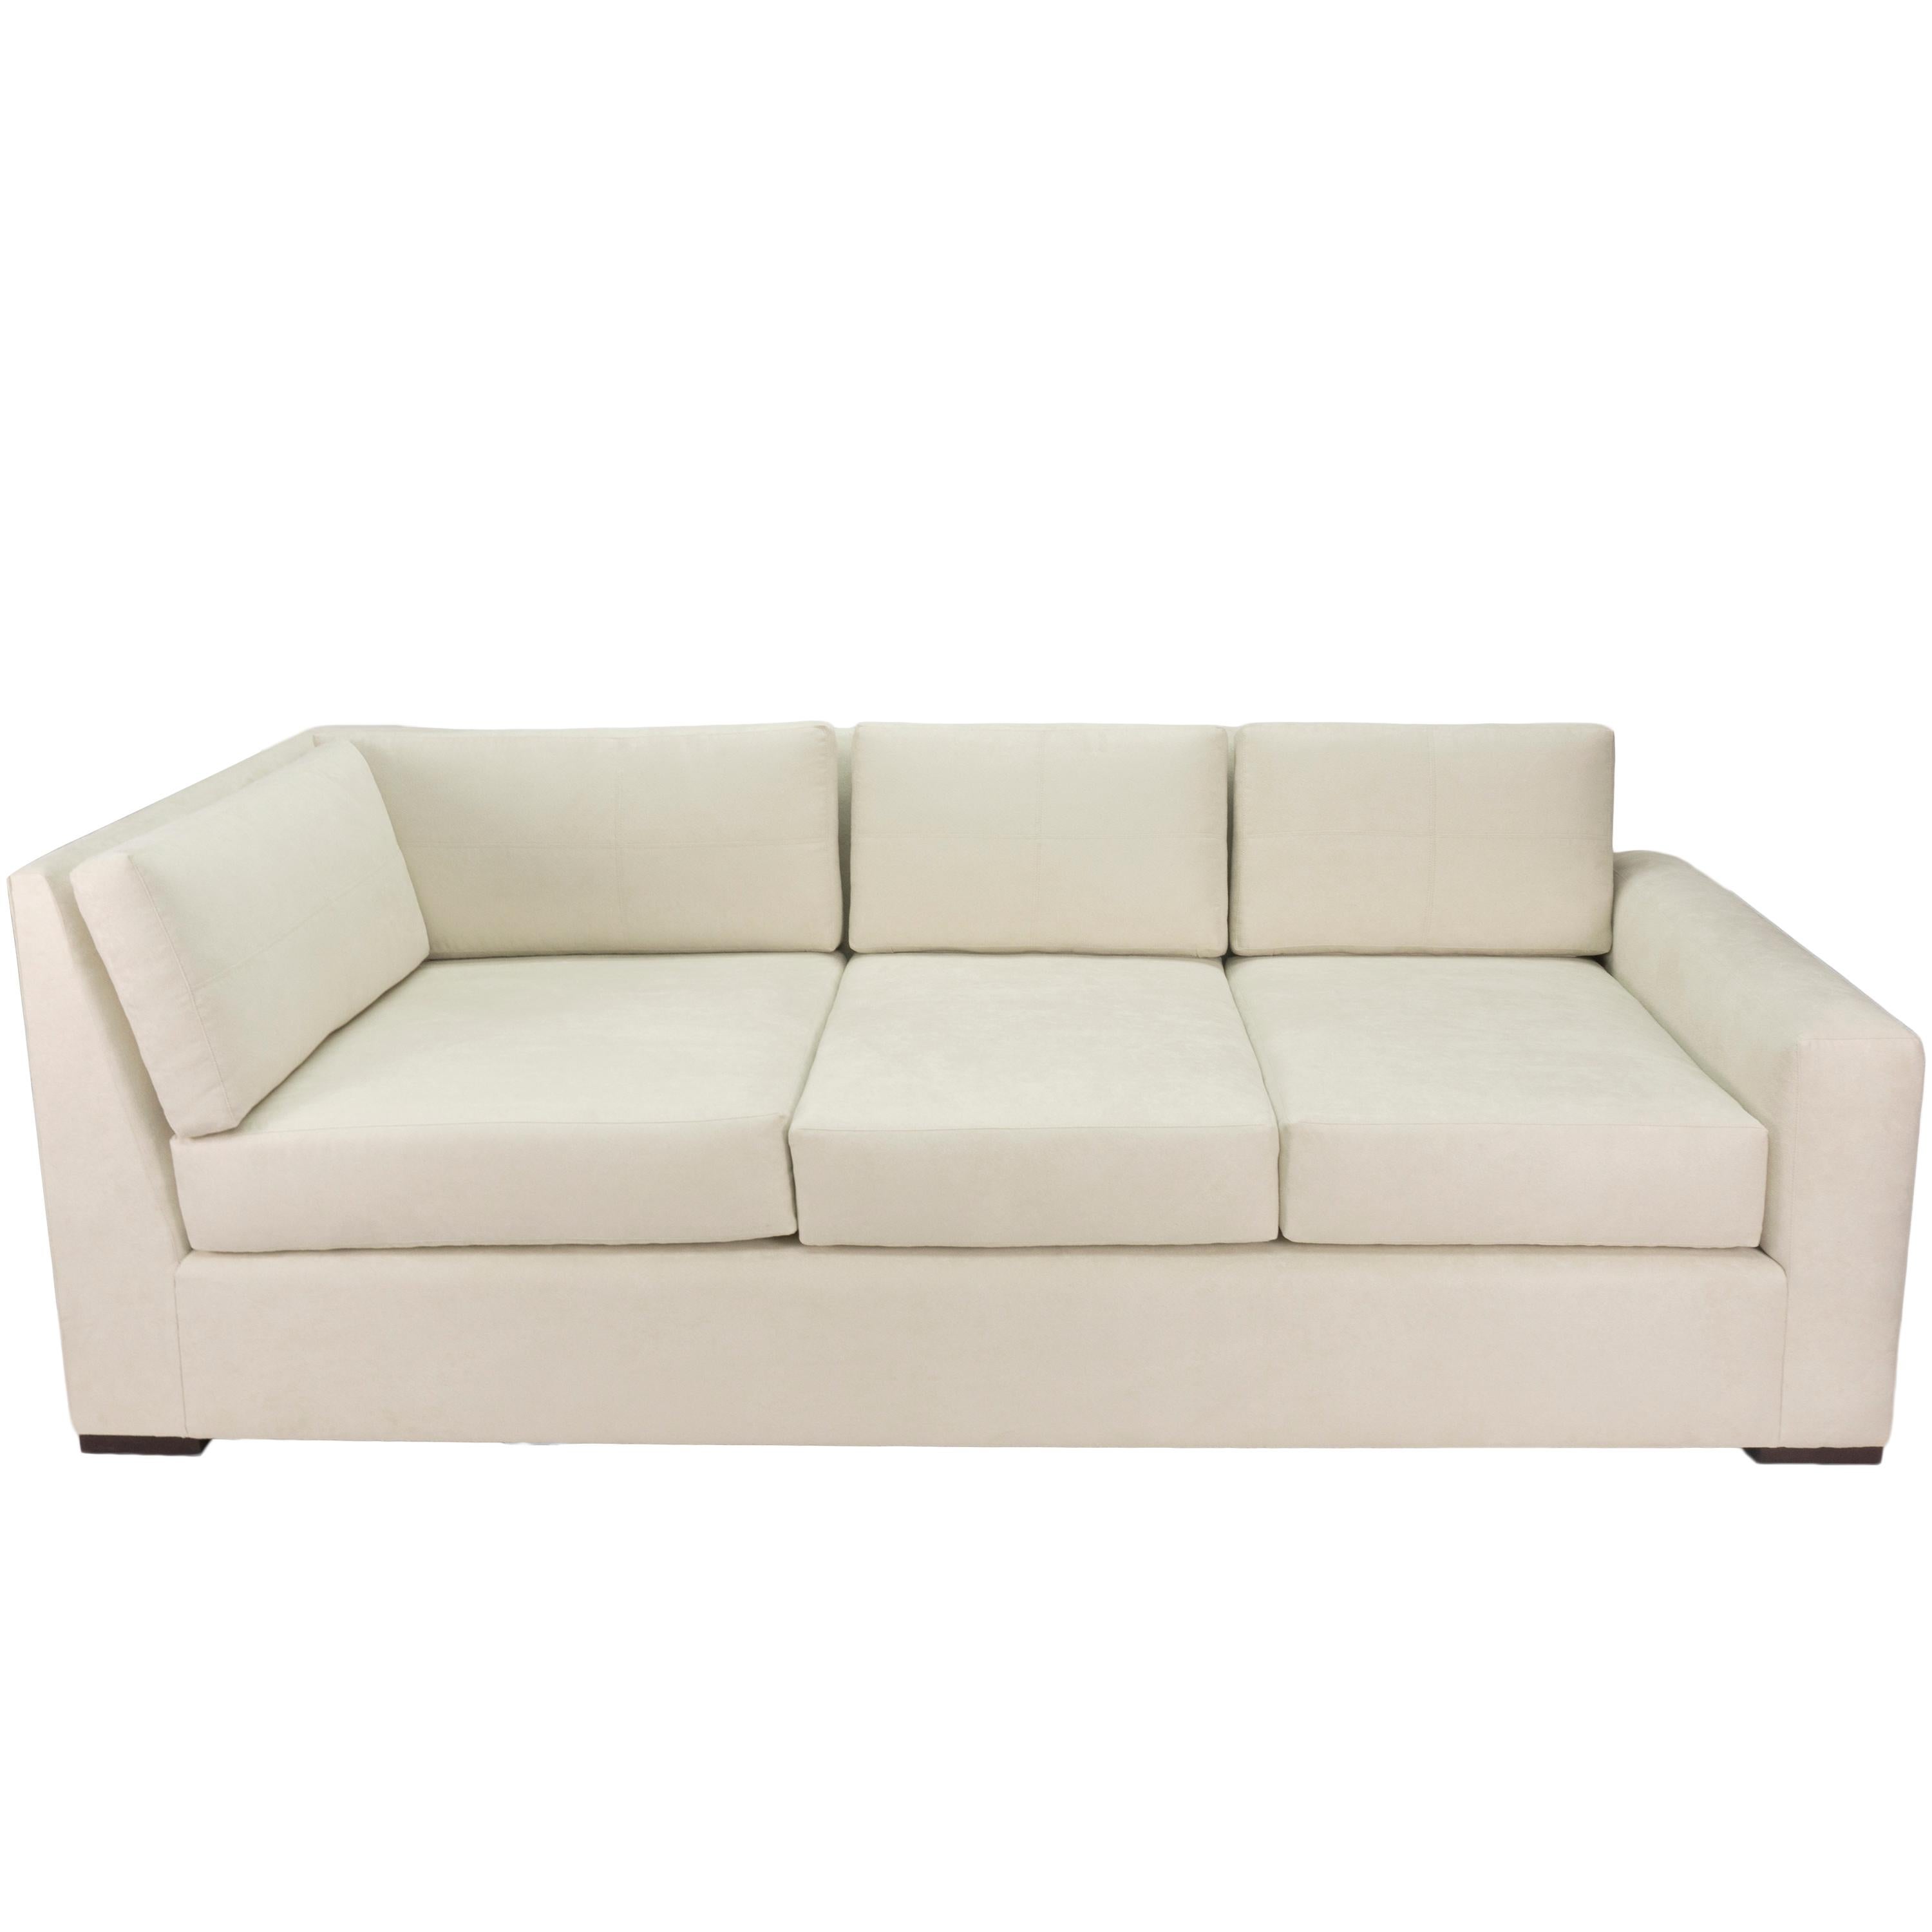 Square Arm Loose Cushion Sectional Sofa, Customizable For Sale 4